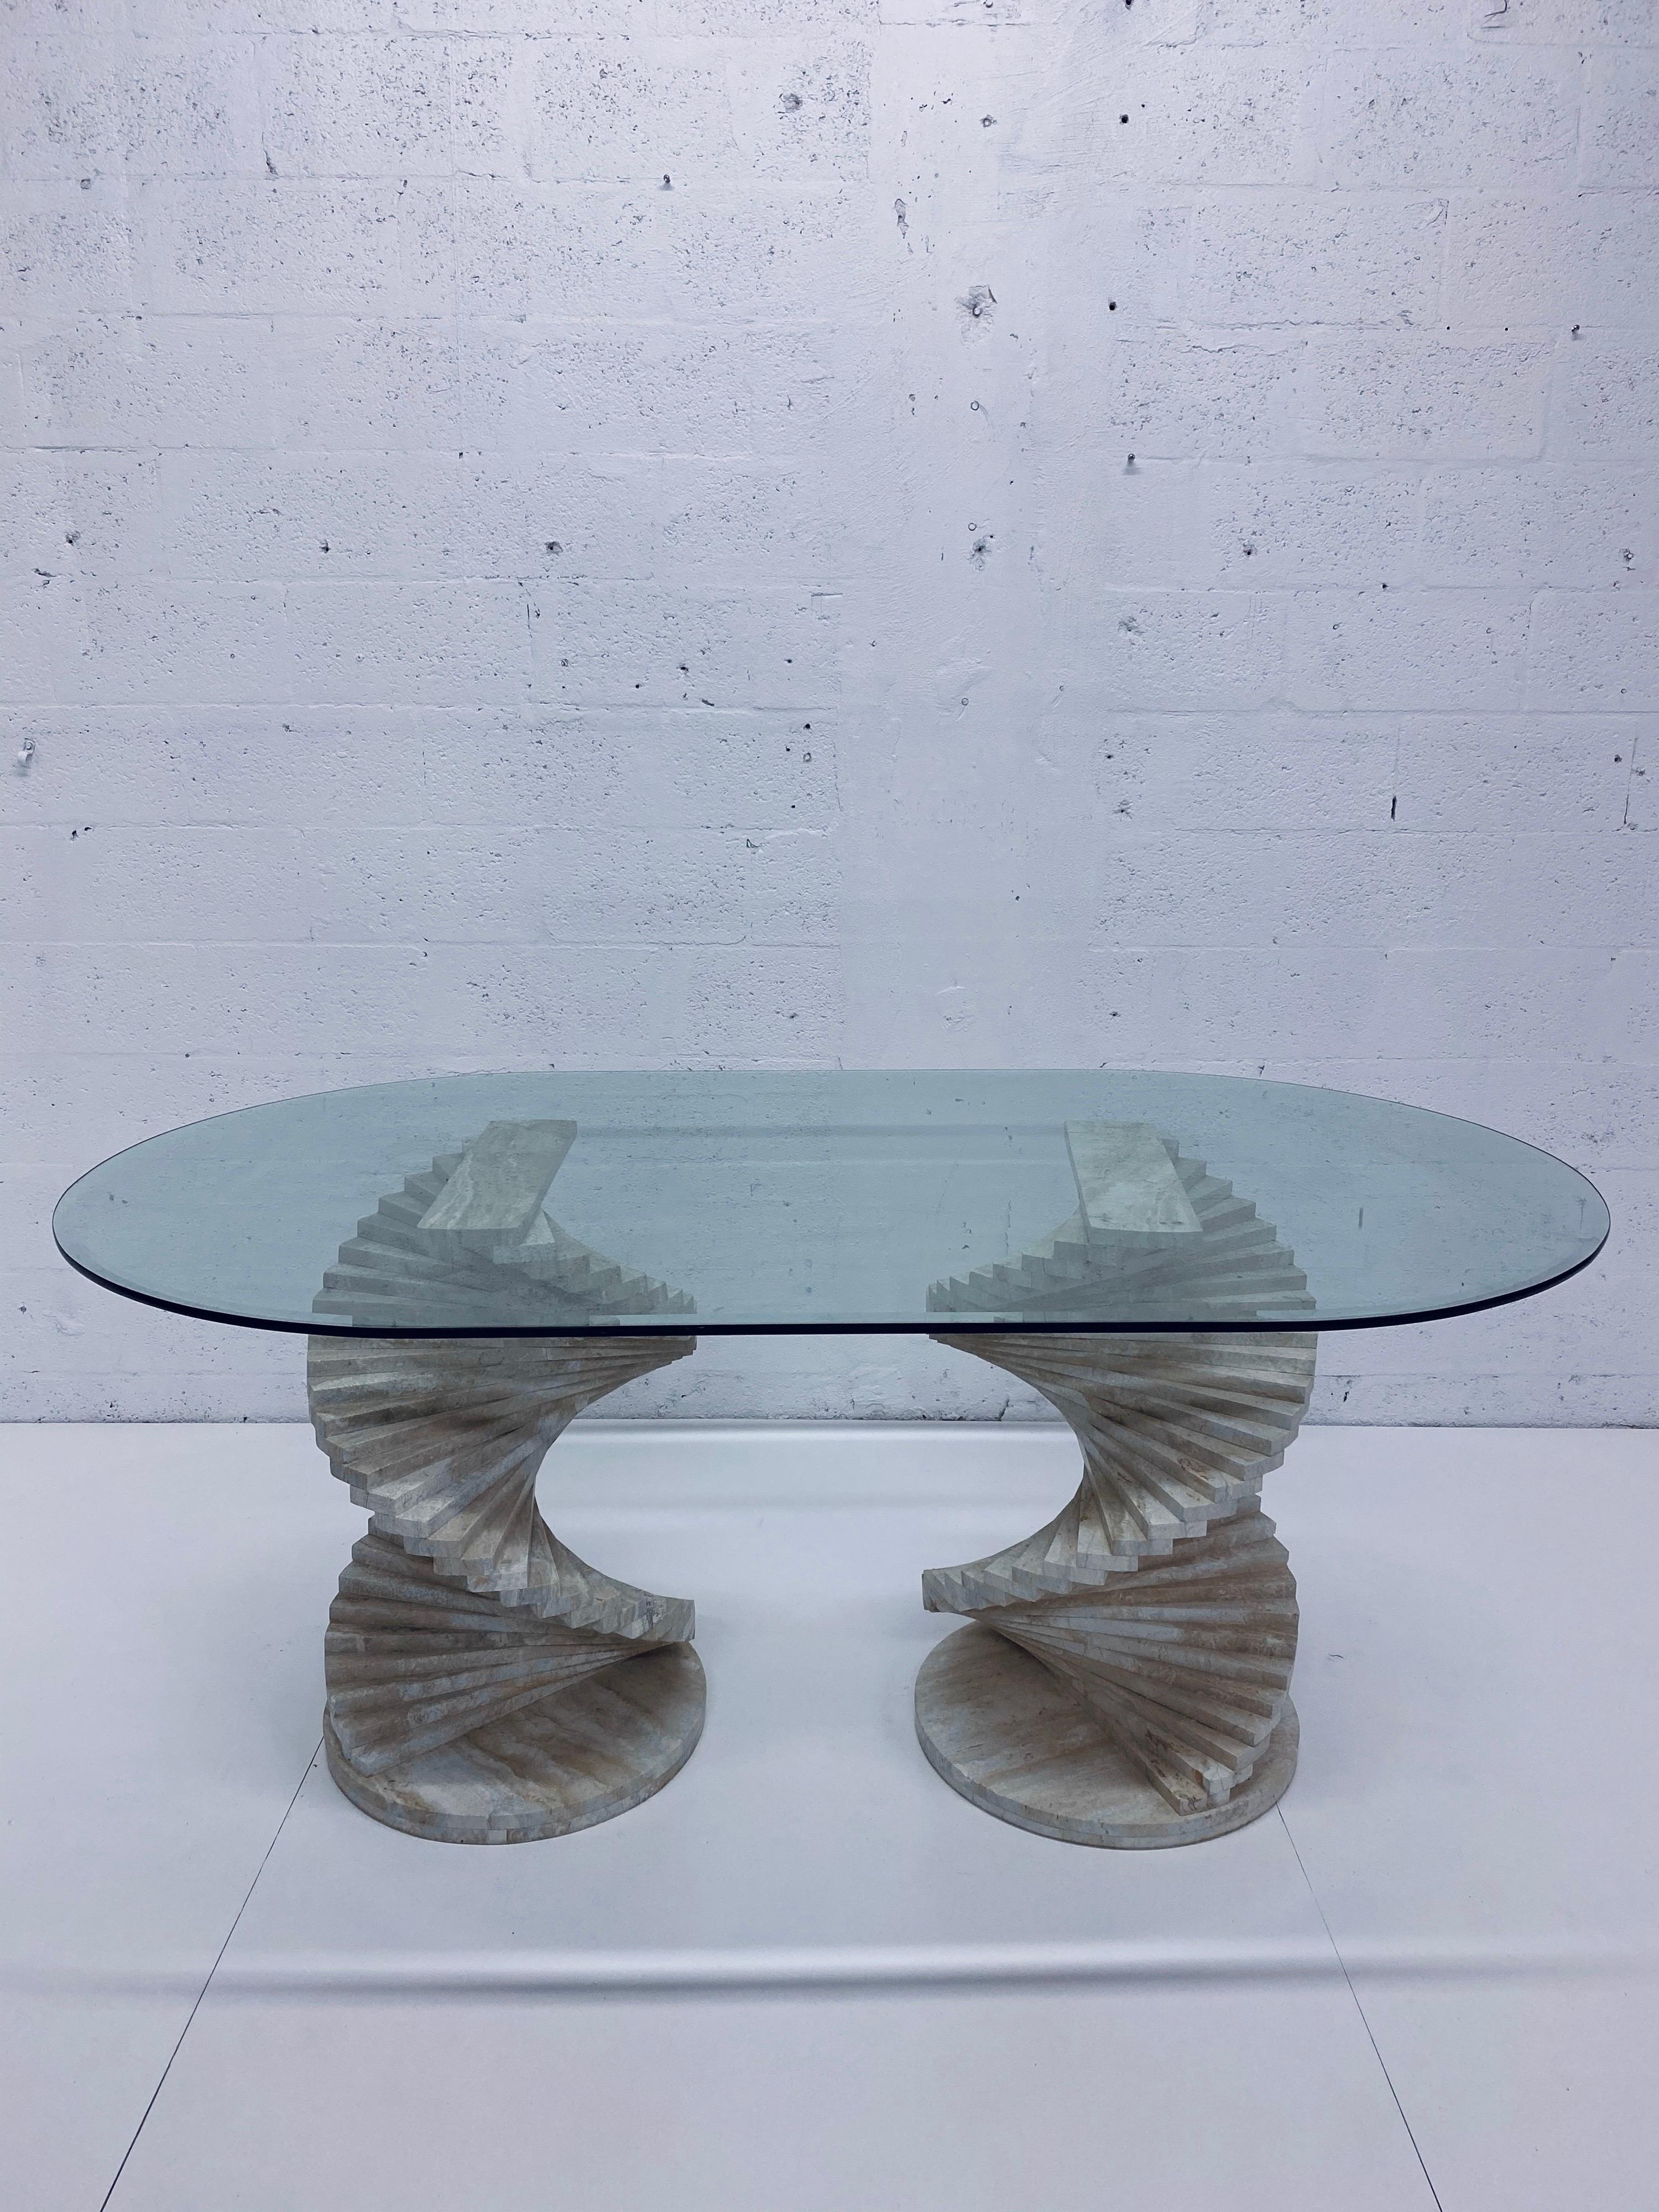 Stacked polished travertine blocks made in spiral rotation dining or center table with glass top from Italy, 1970s. Oval glass top is included or have your own glass custom made for your space.

Individual base dimensions:
W19